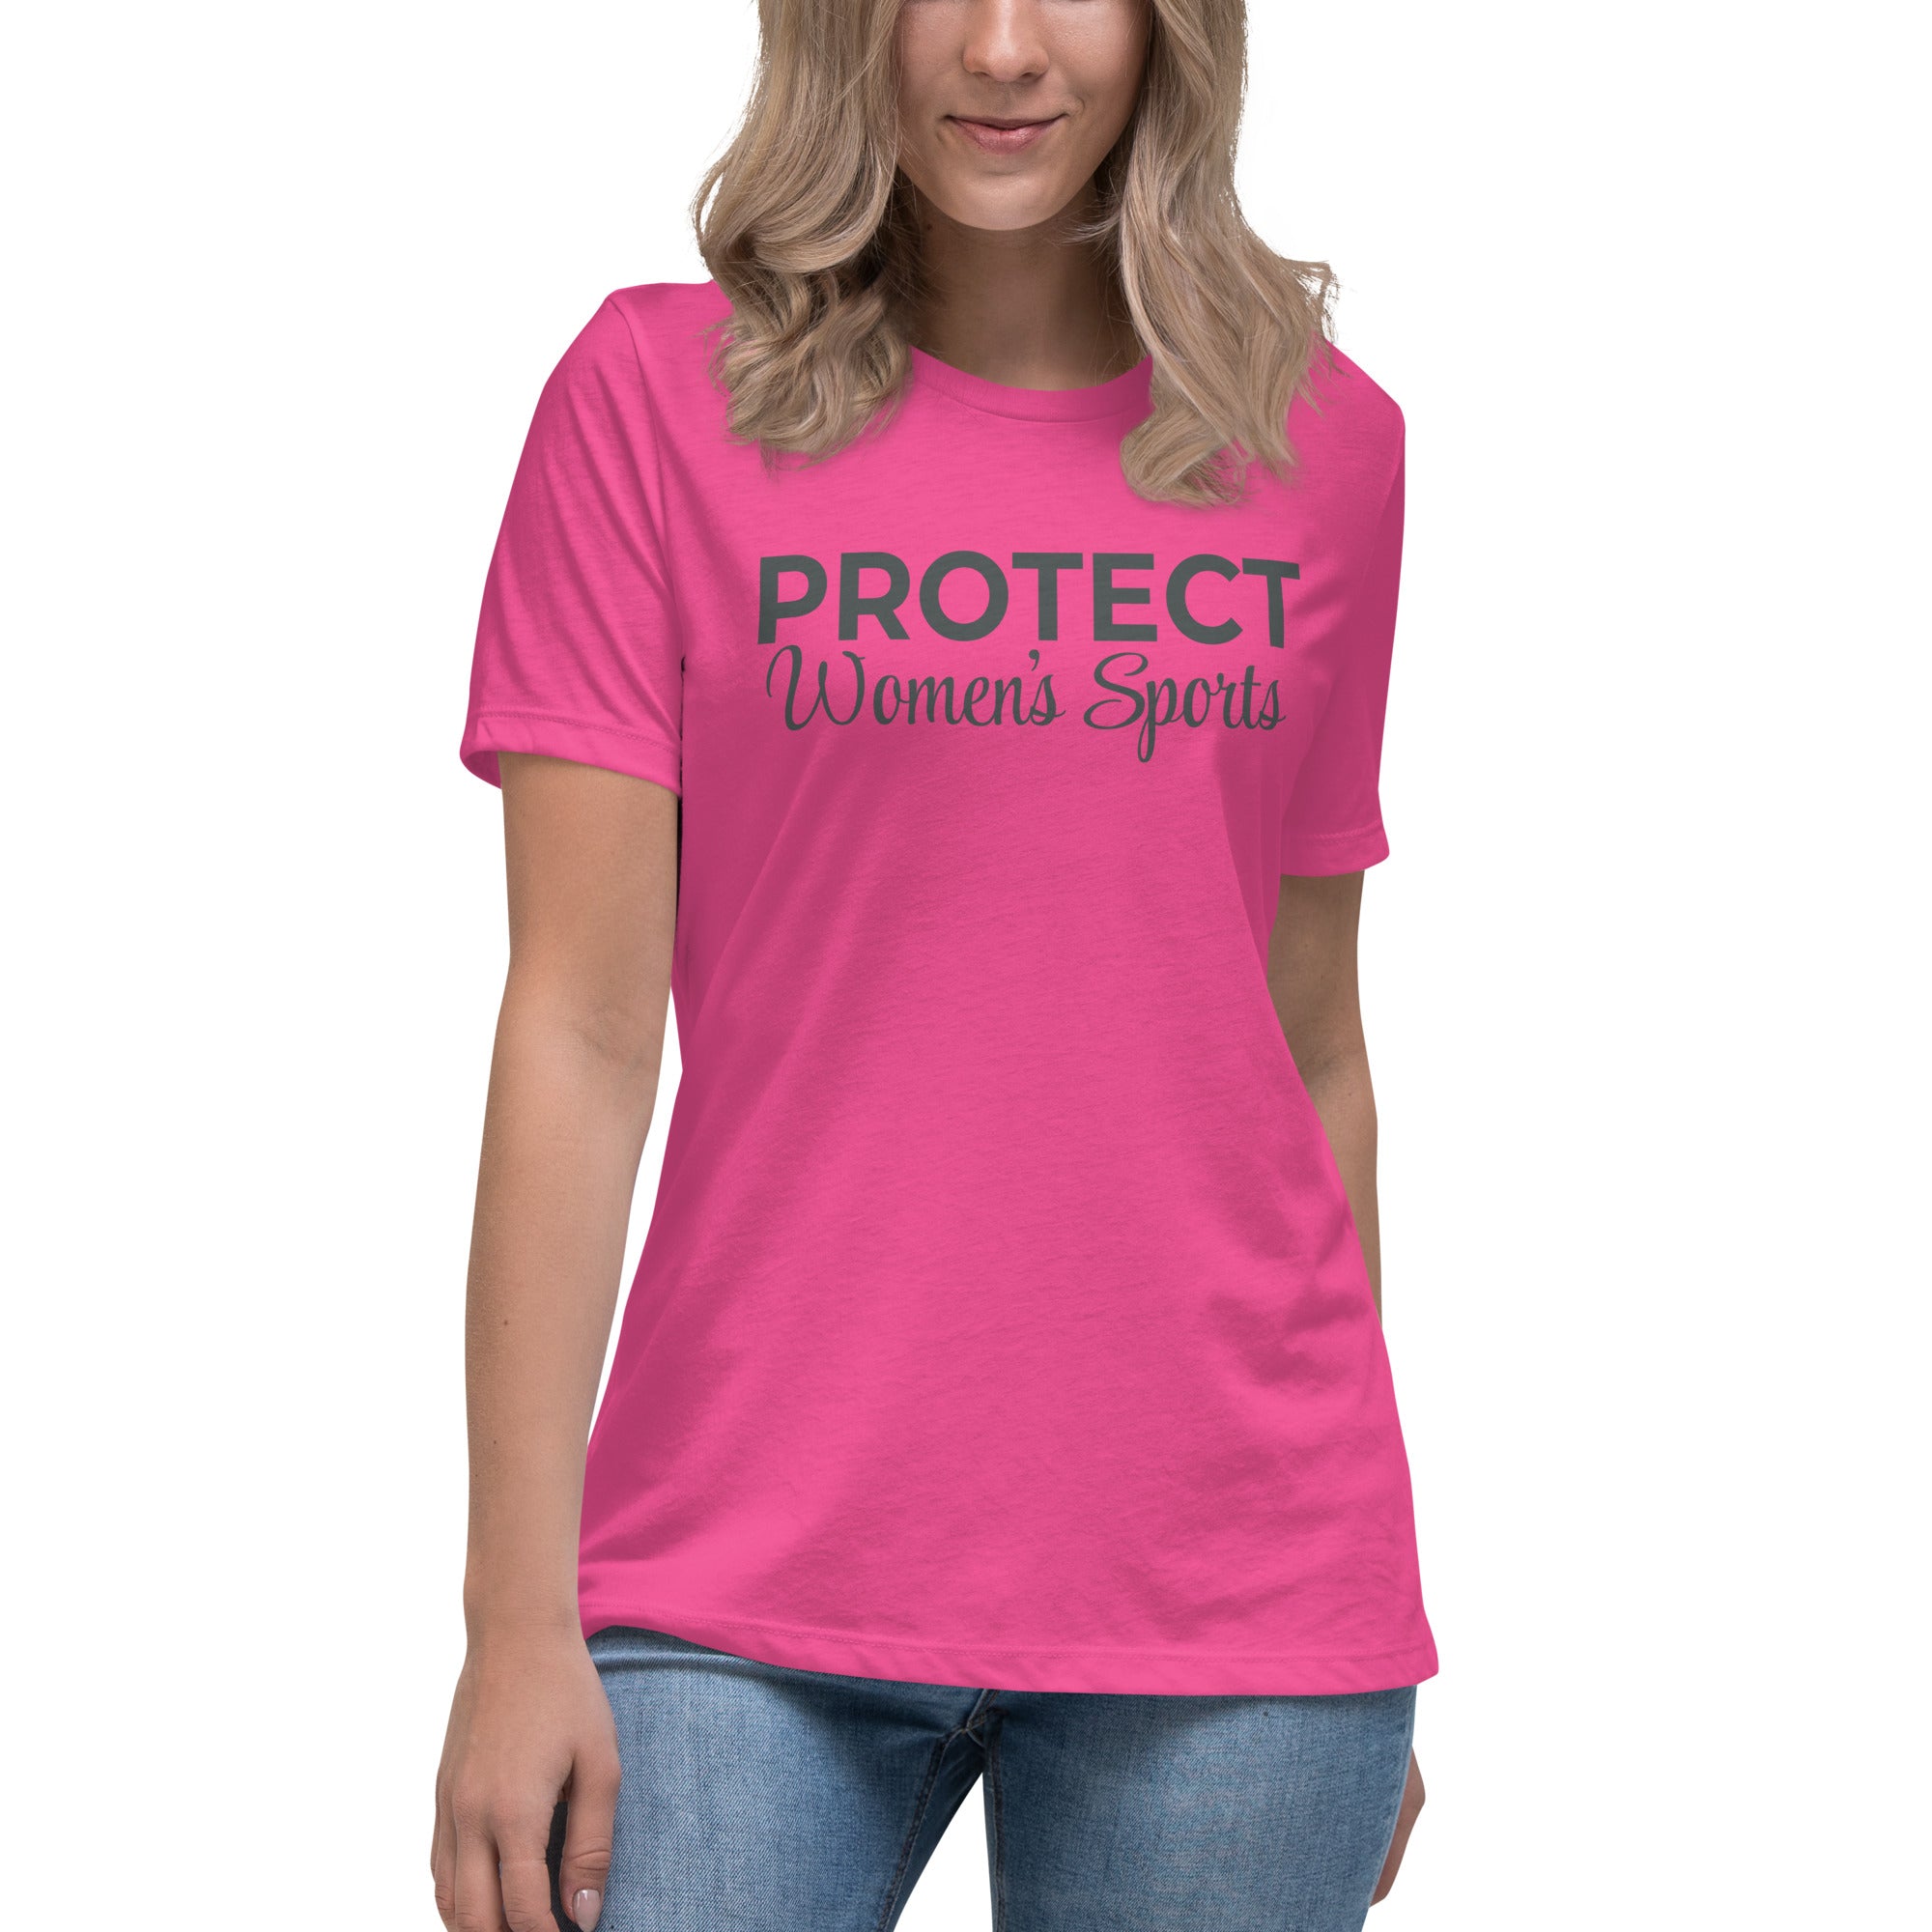 Support Women's Sports - Protect Women's Sports T-Shirt | Shop For Your Passions